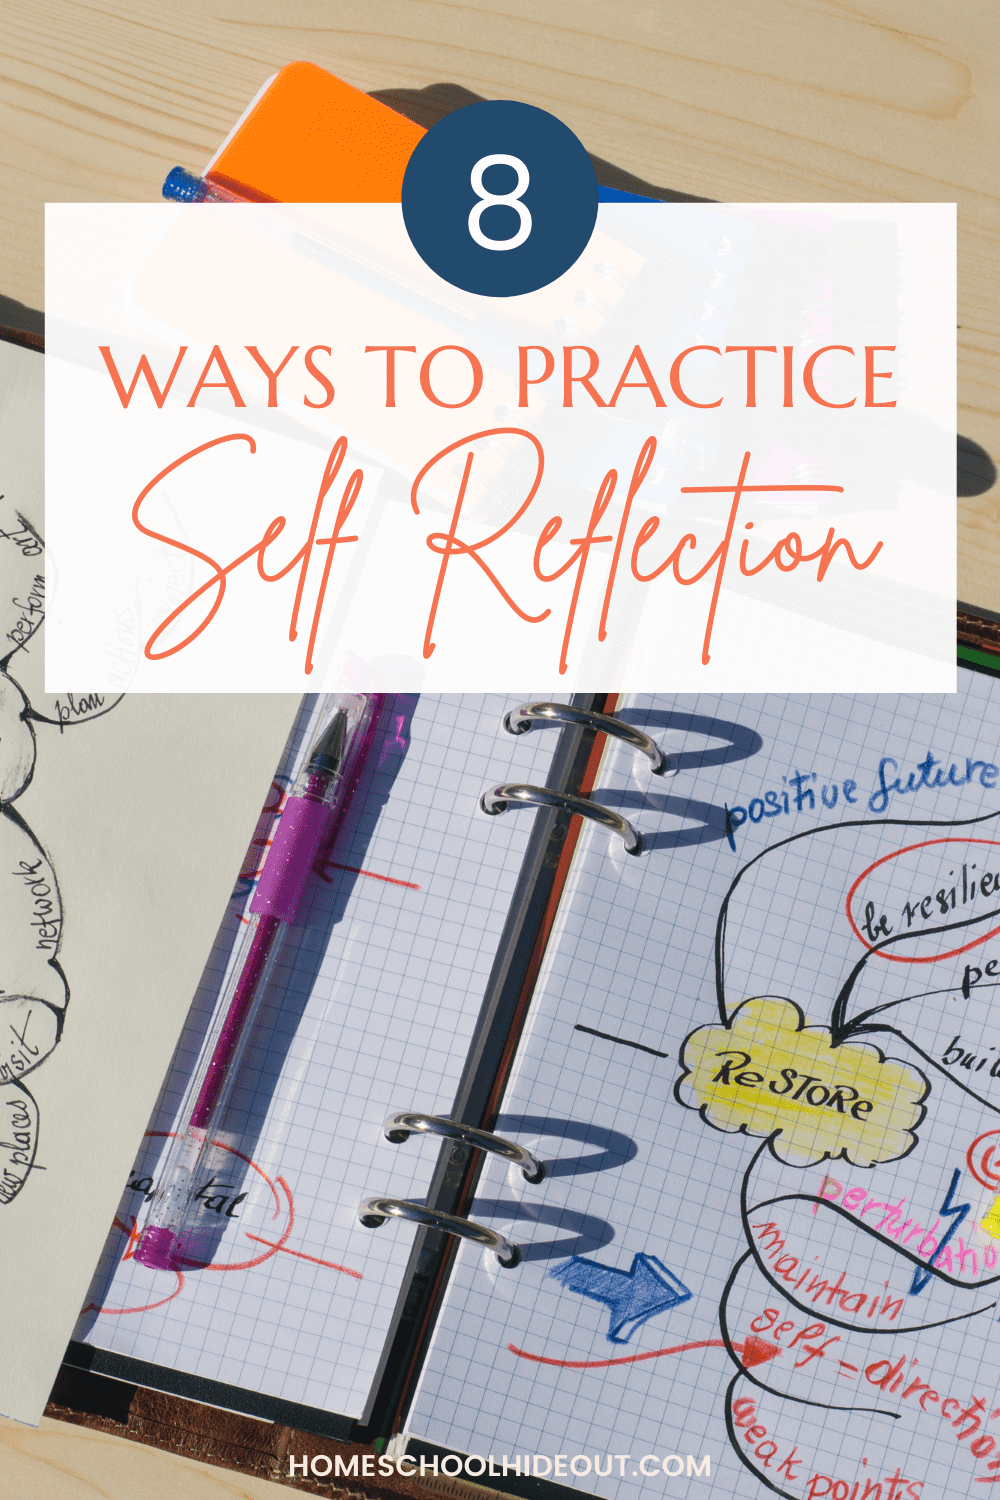 Learning to practice self reflection is a game-changer for students.These tips are perfect to help you get started. I love #4!